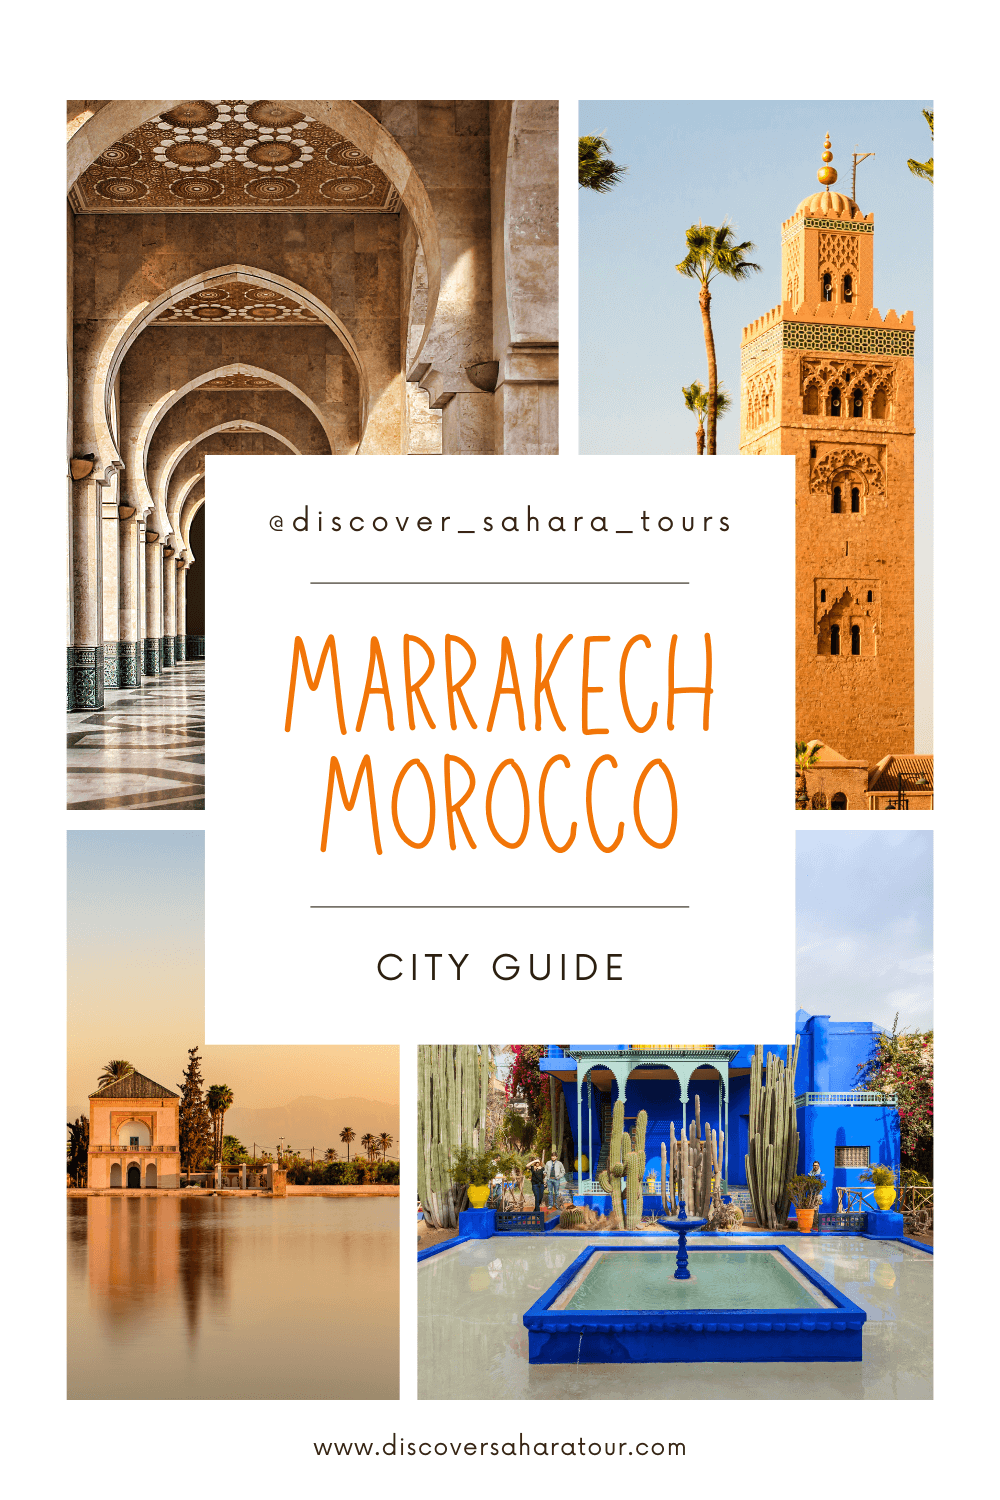 Featured image for “Discover the Best of Marrakech”